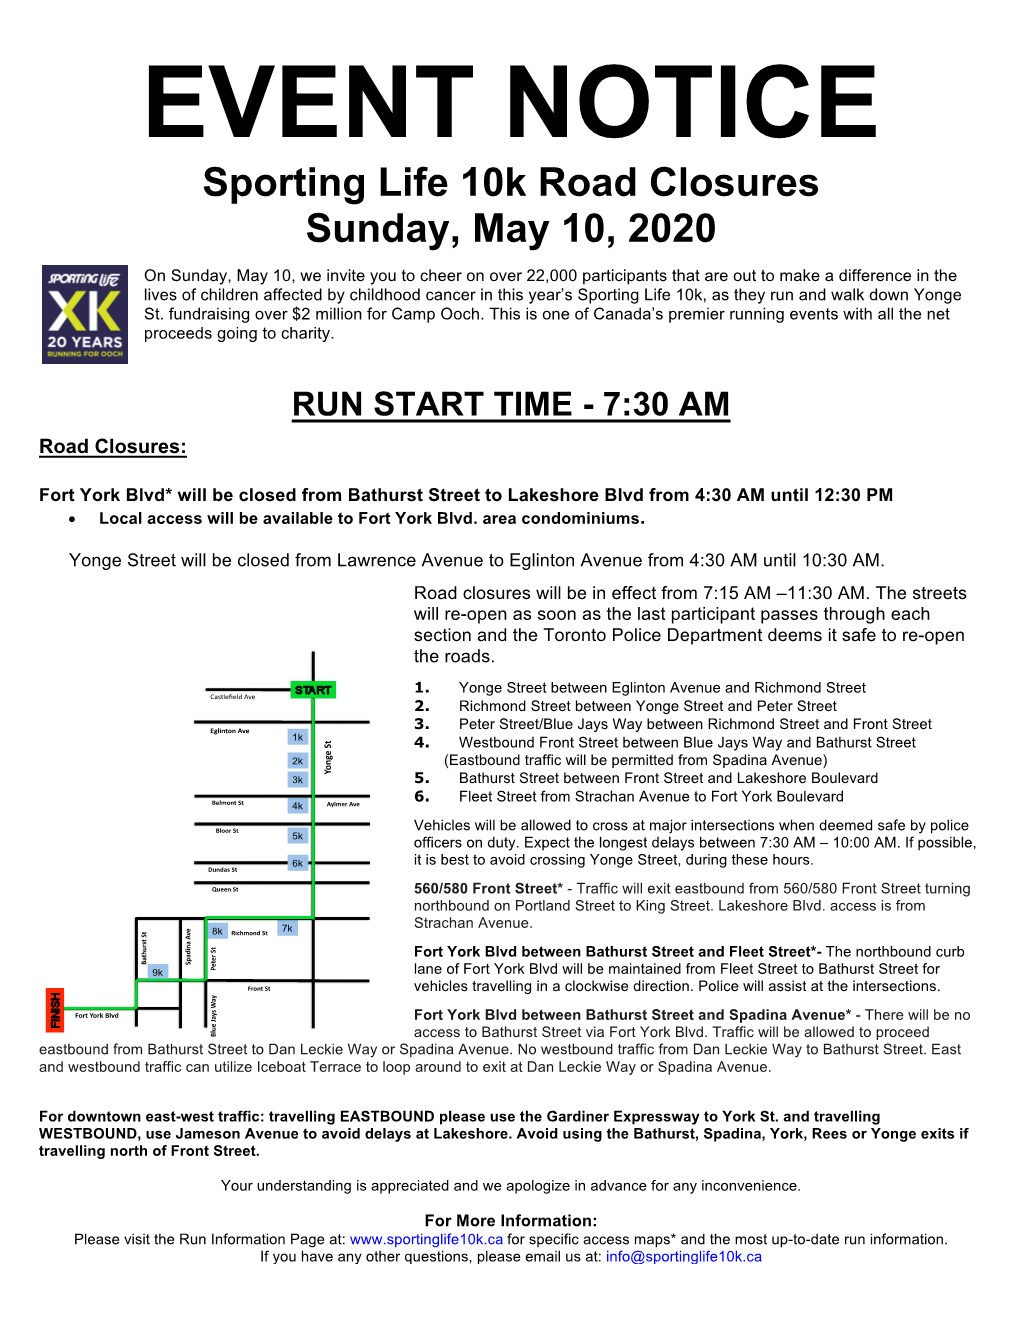 EVENT NOTICE Sporting Life 10K Road Closures Sunday, May 10, 2020